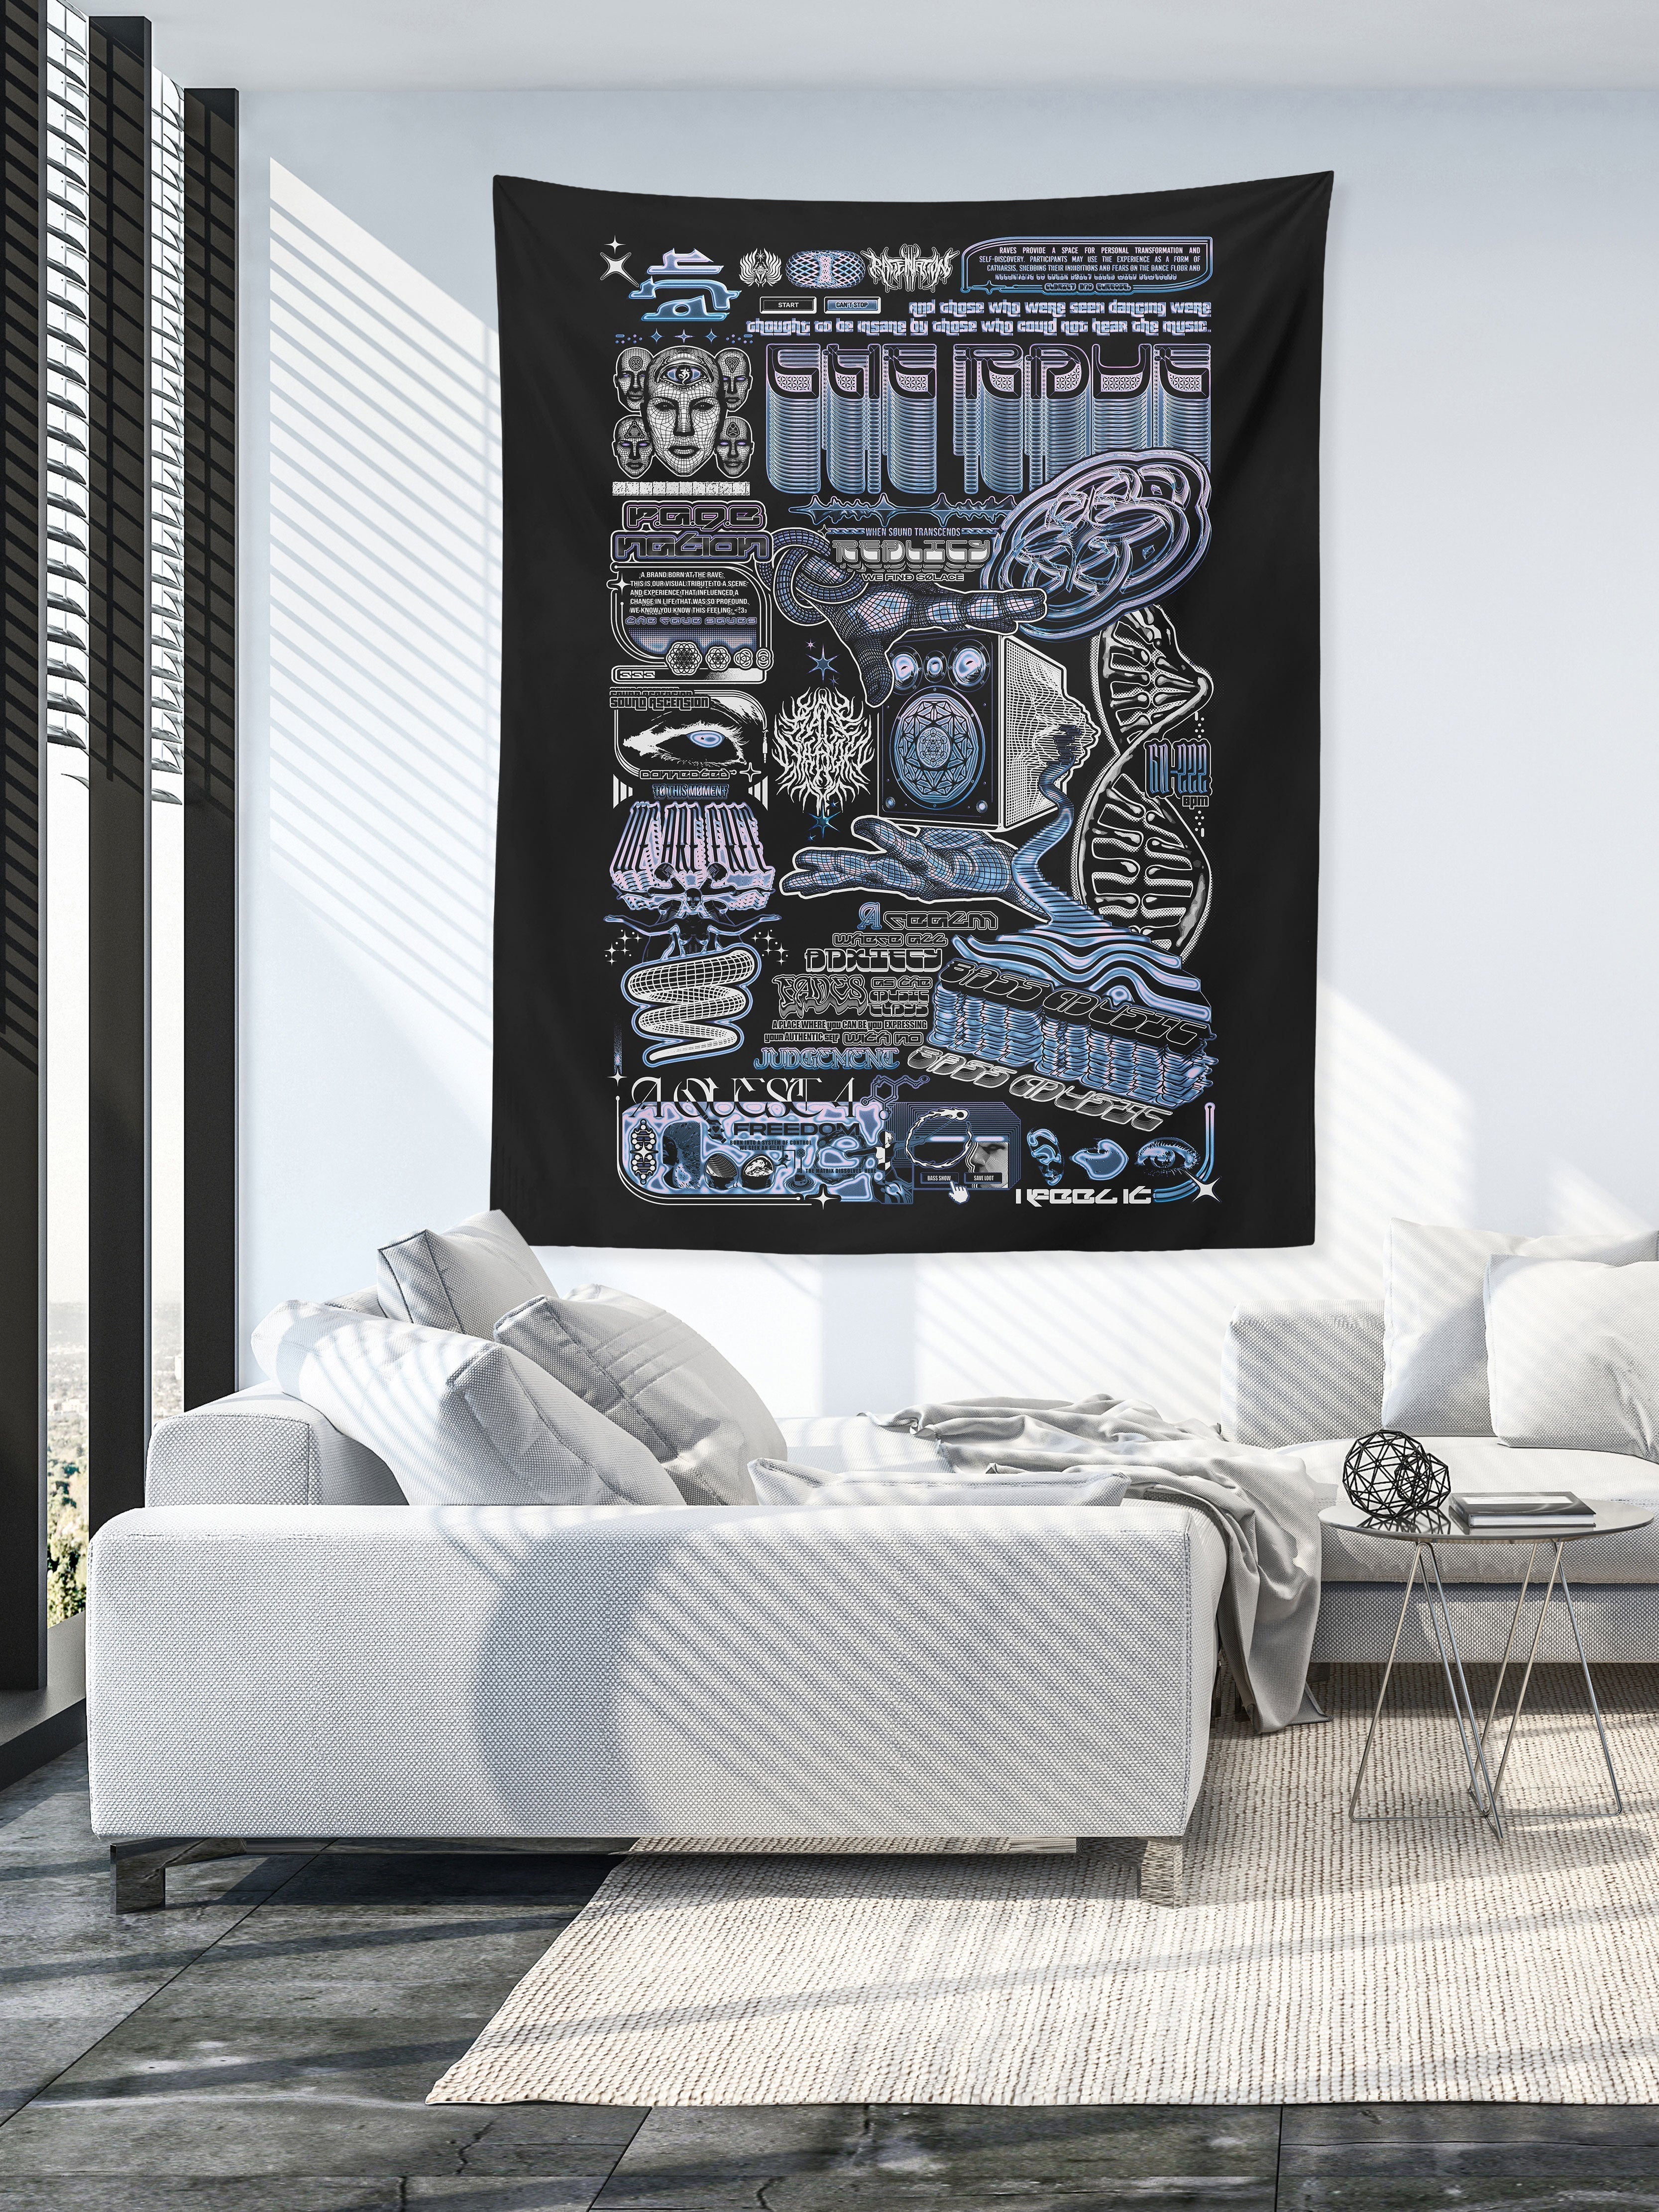 THE RAVE 002 ✦ RAGE NATION ✦ 111 Limited Edition Tapestry Tapestry 